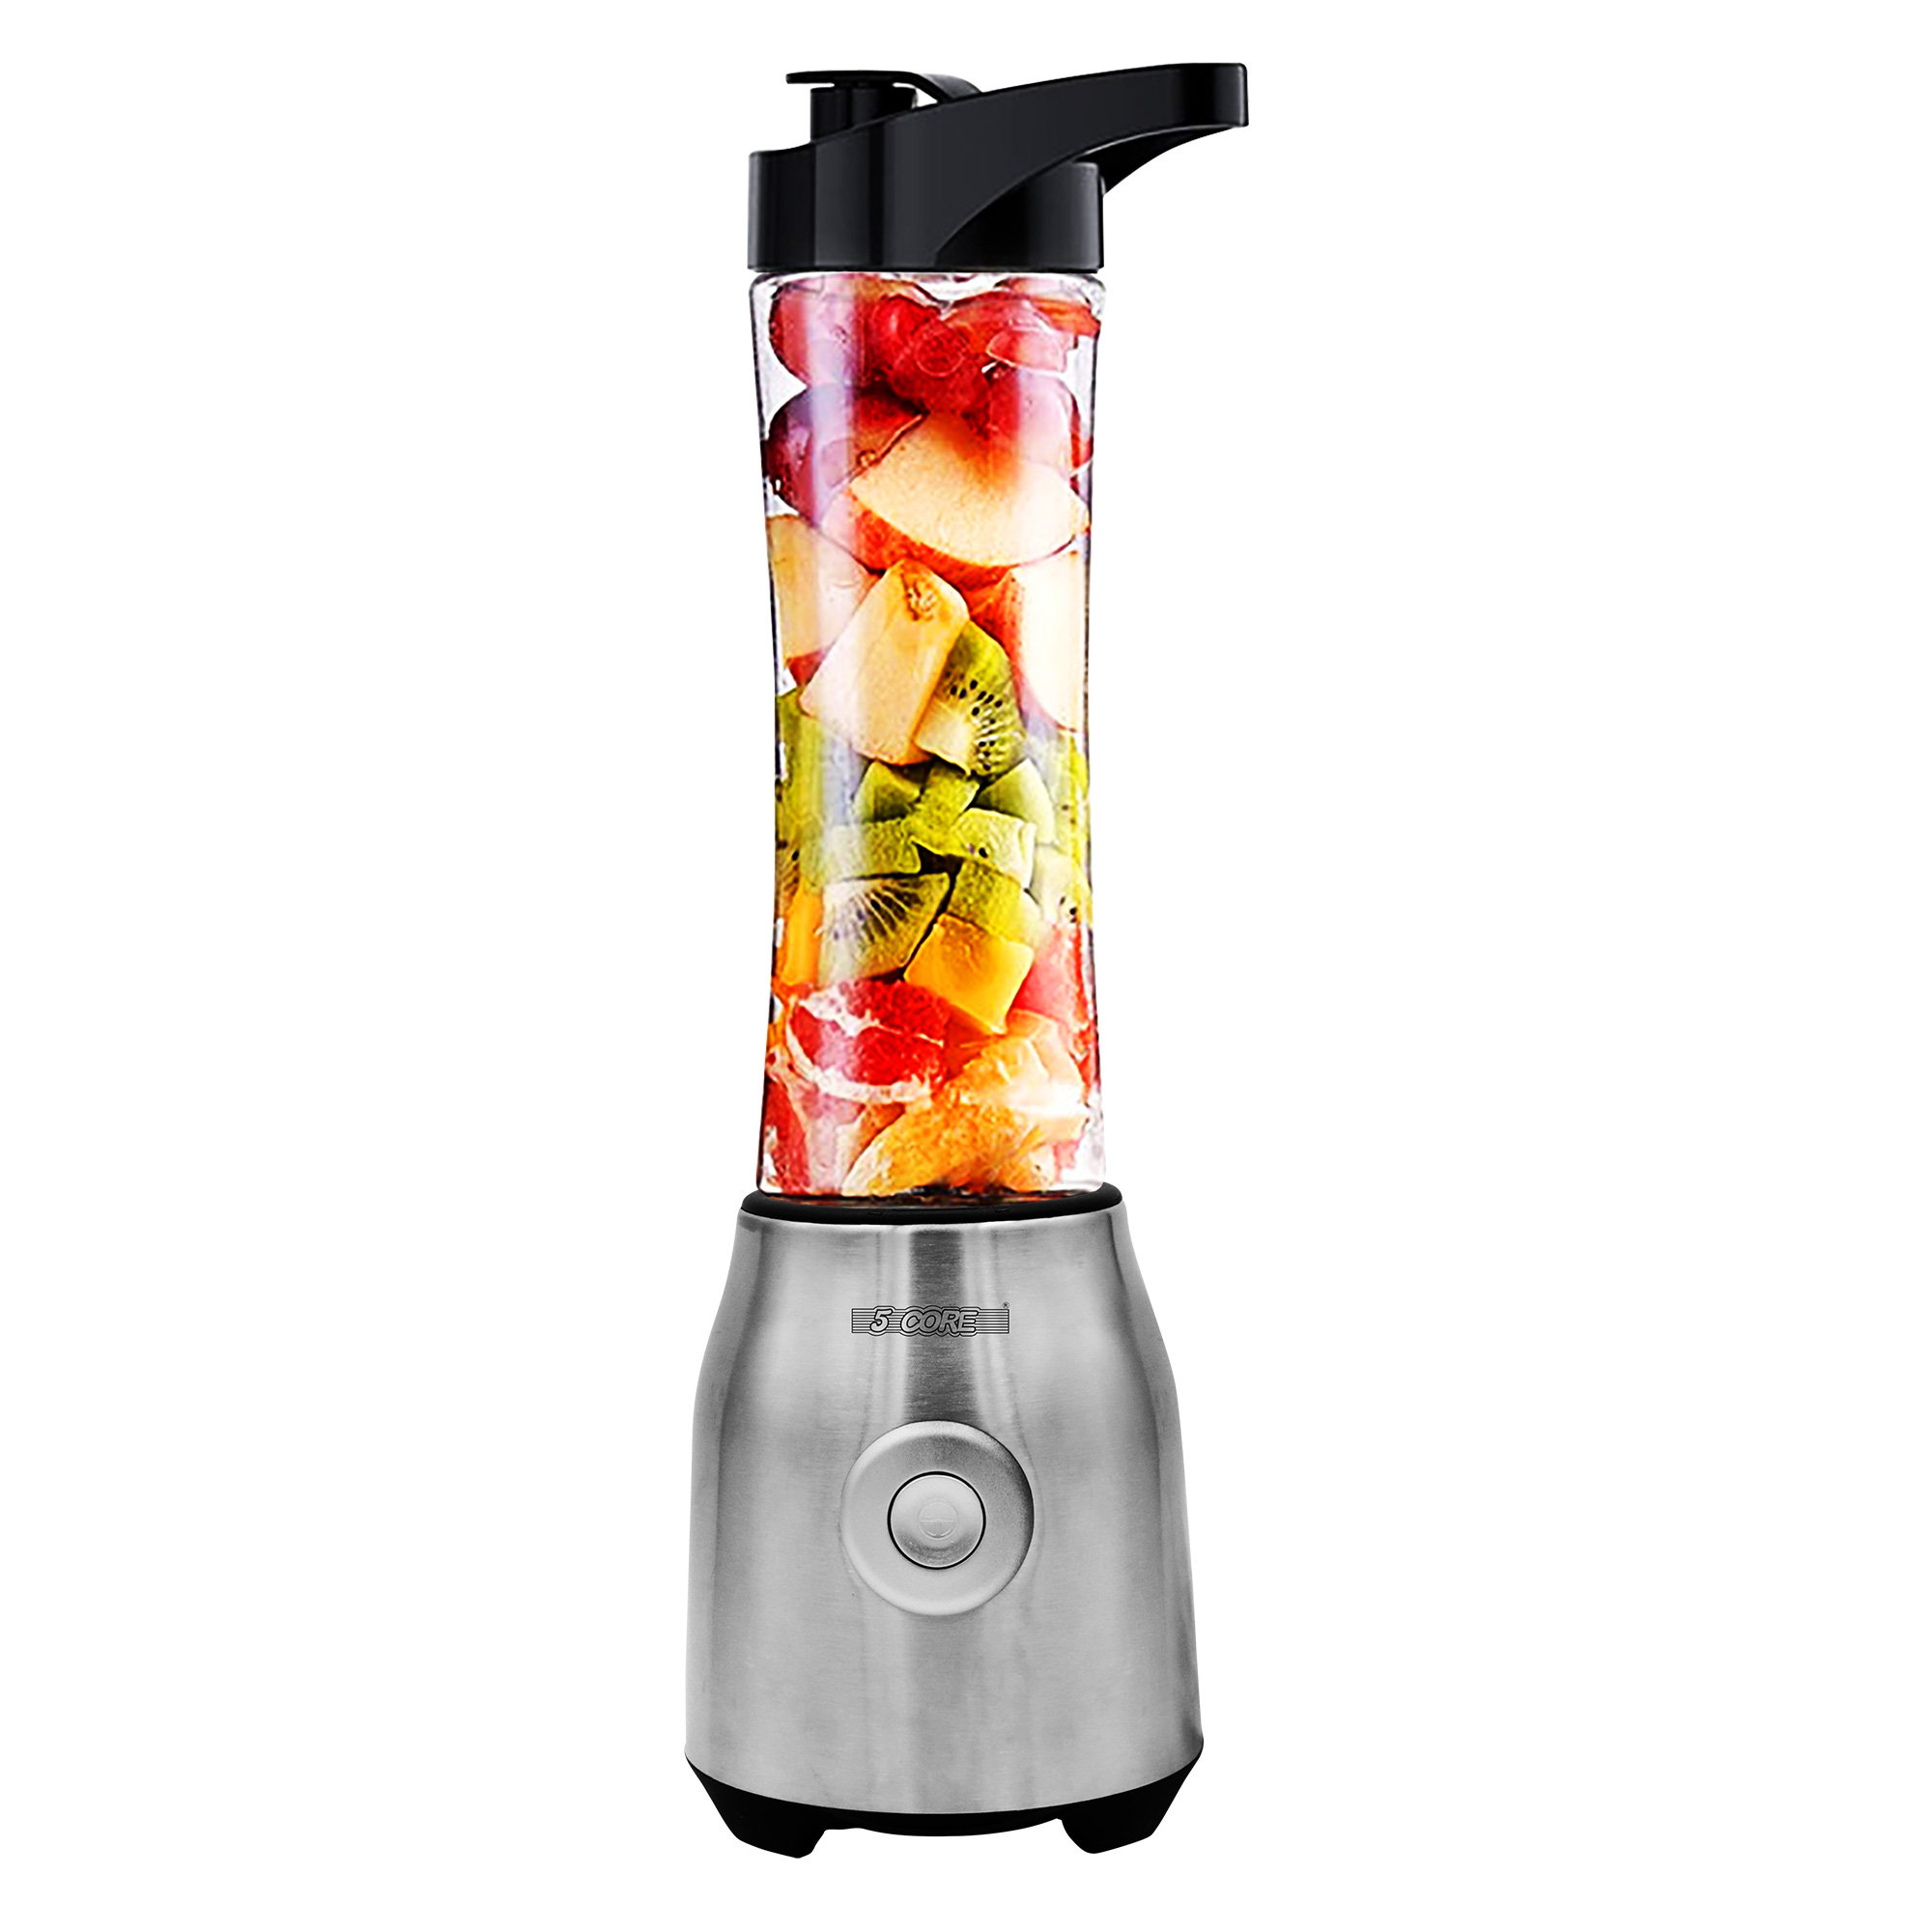 Nutribullet Pro+ personal-sized blender delivers 1,200 watts of